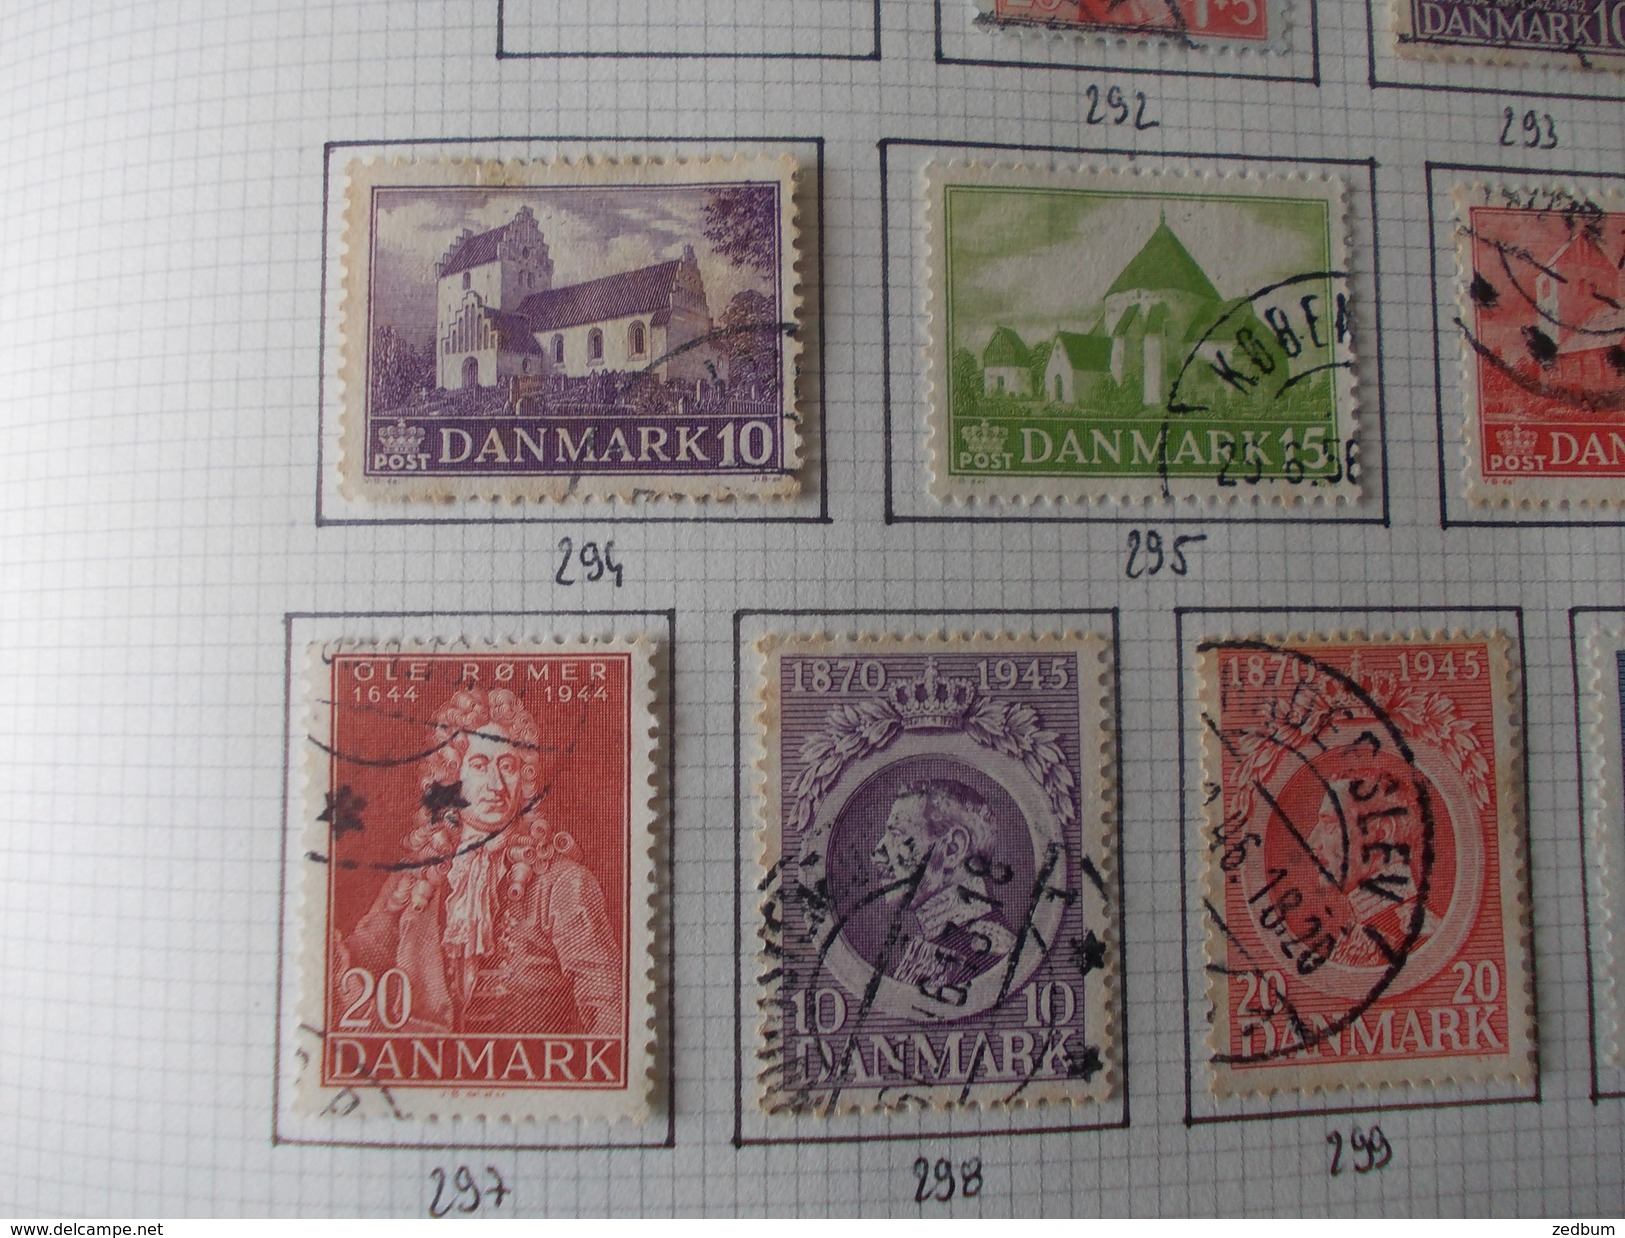 TIMBRE 1 page Danemark 25 timbres valeur 5.75 &euro;